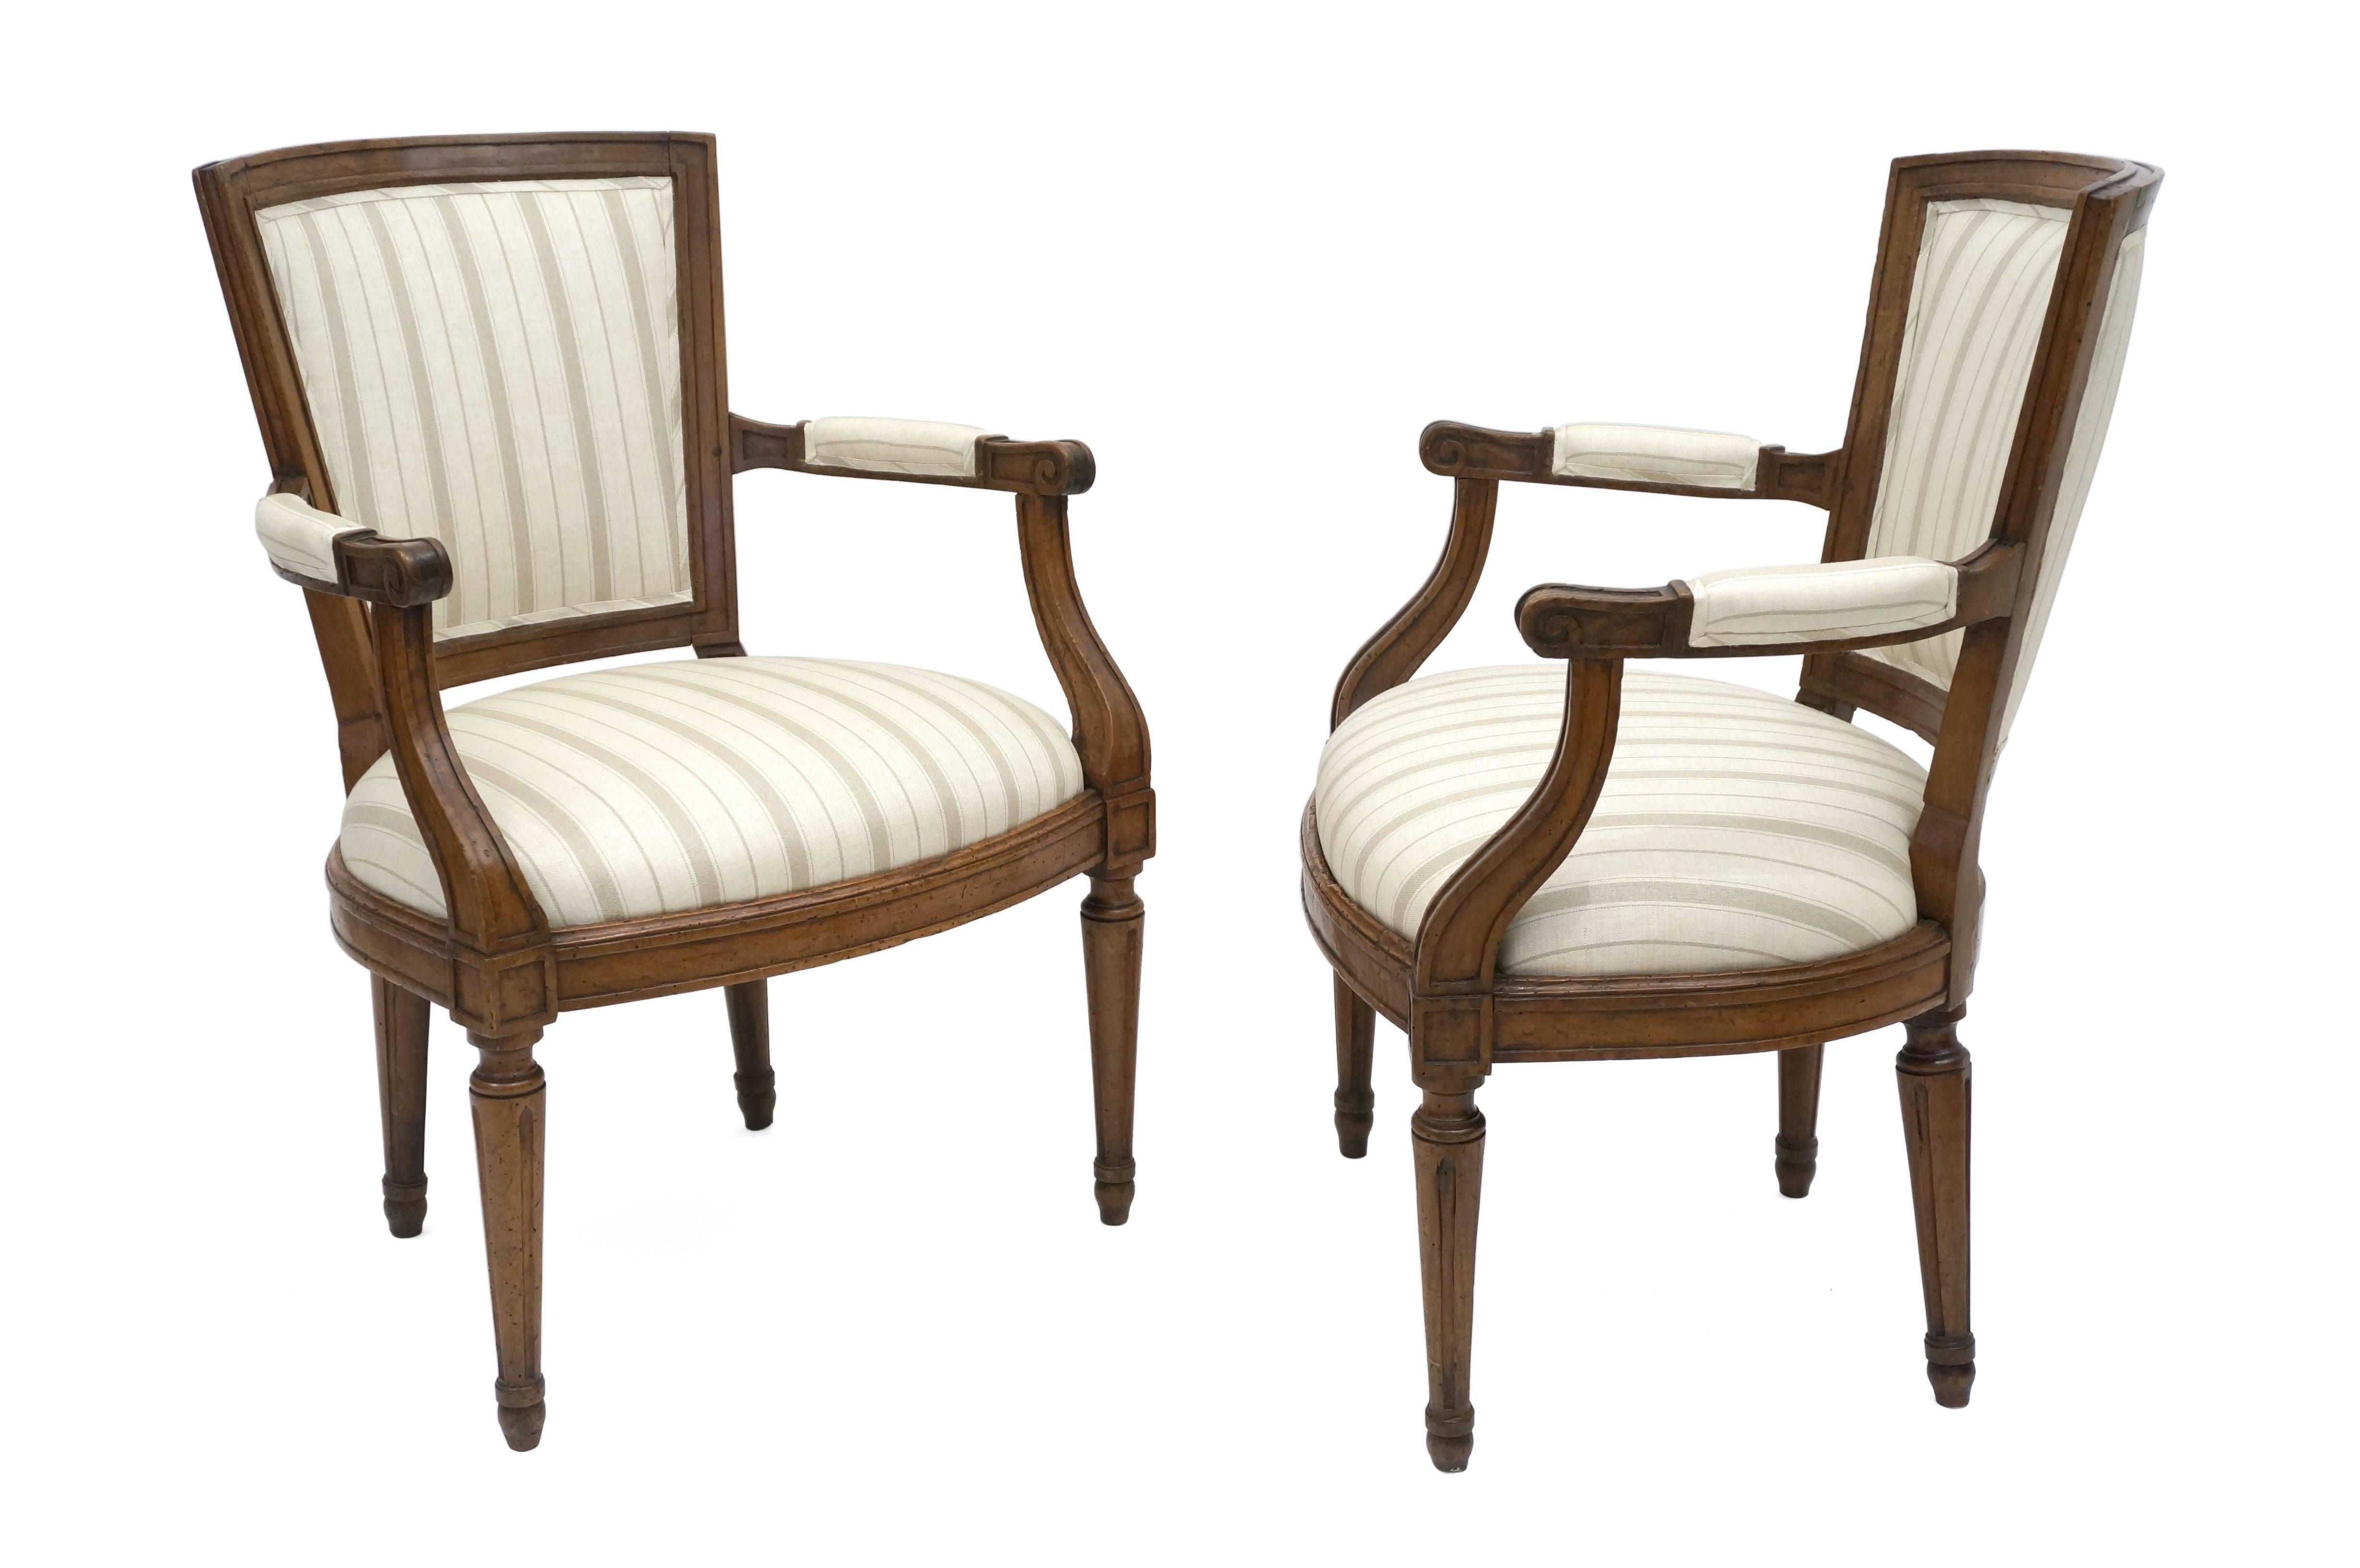 Pair of 18th century Italian walnut armchairs with newly upholstered seats and backs in a beige striped linen.